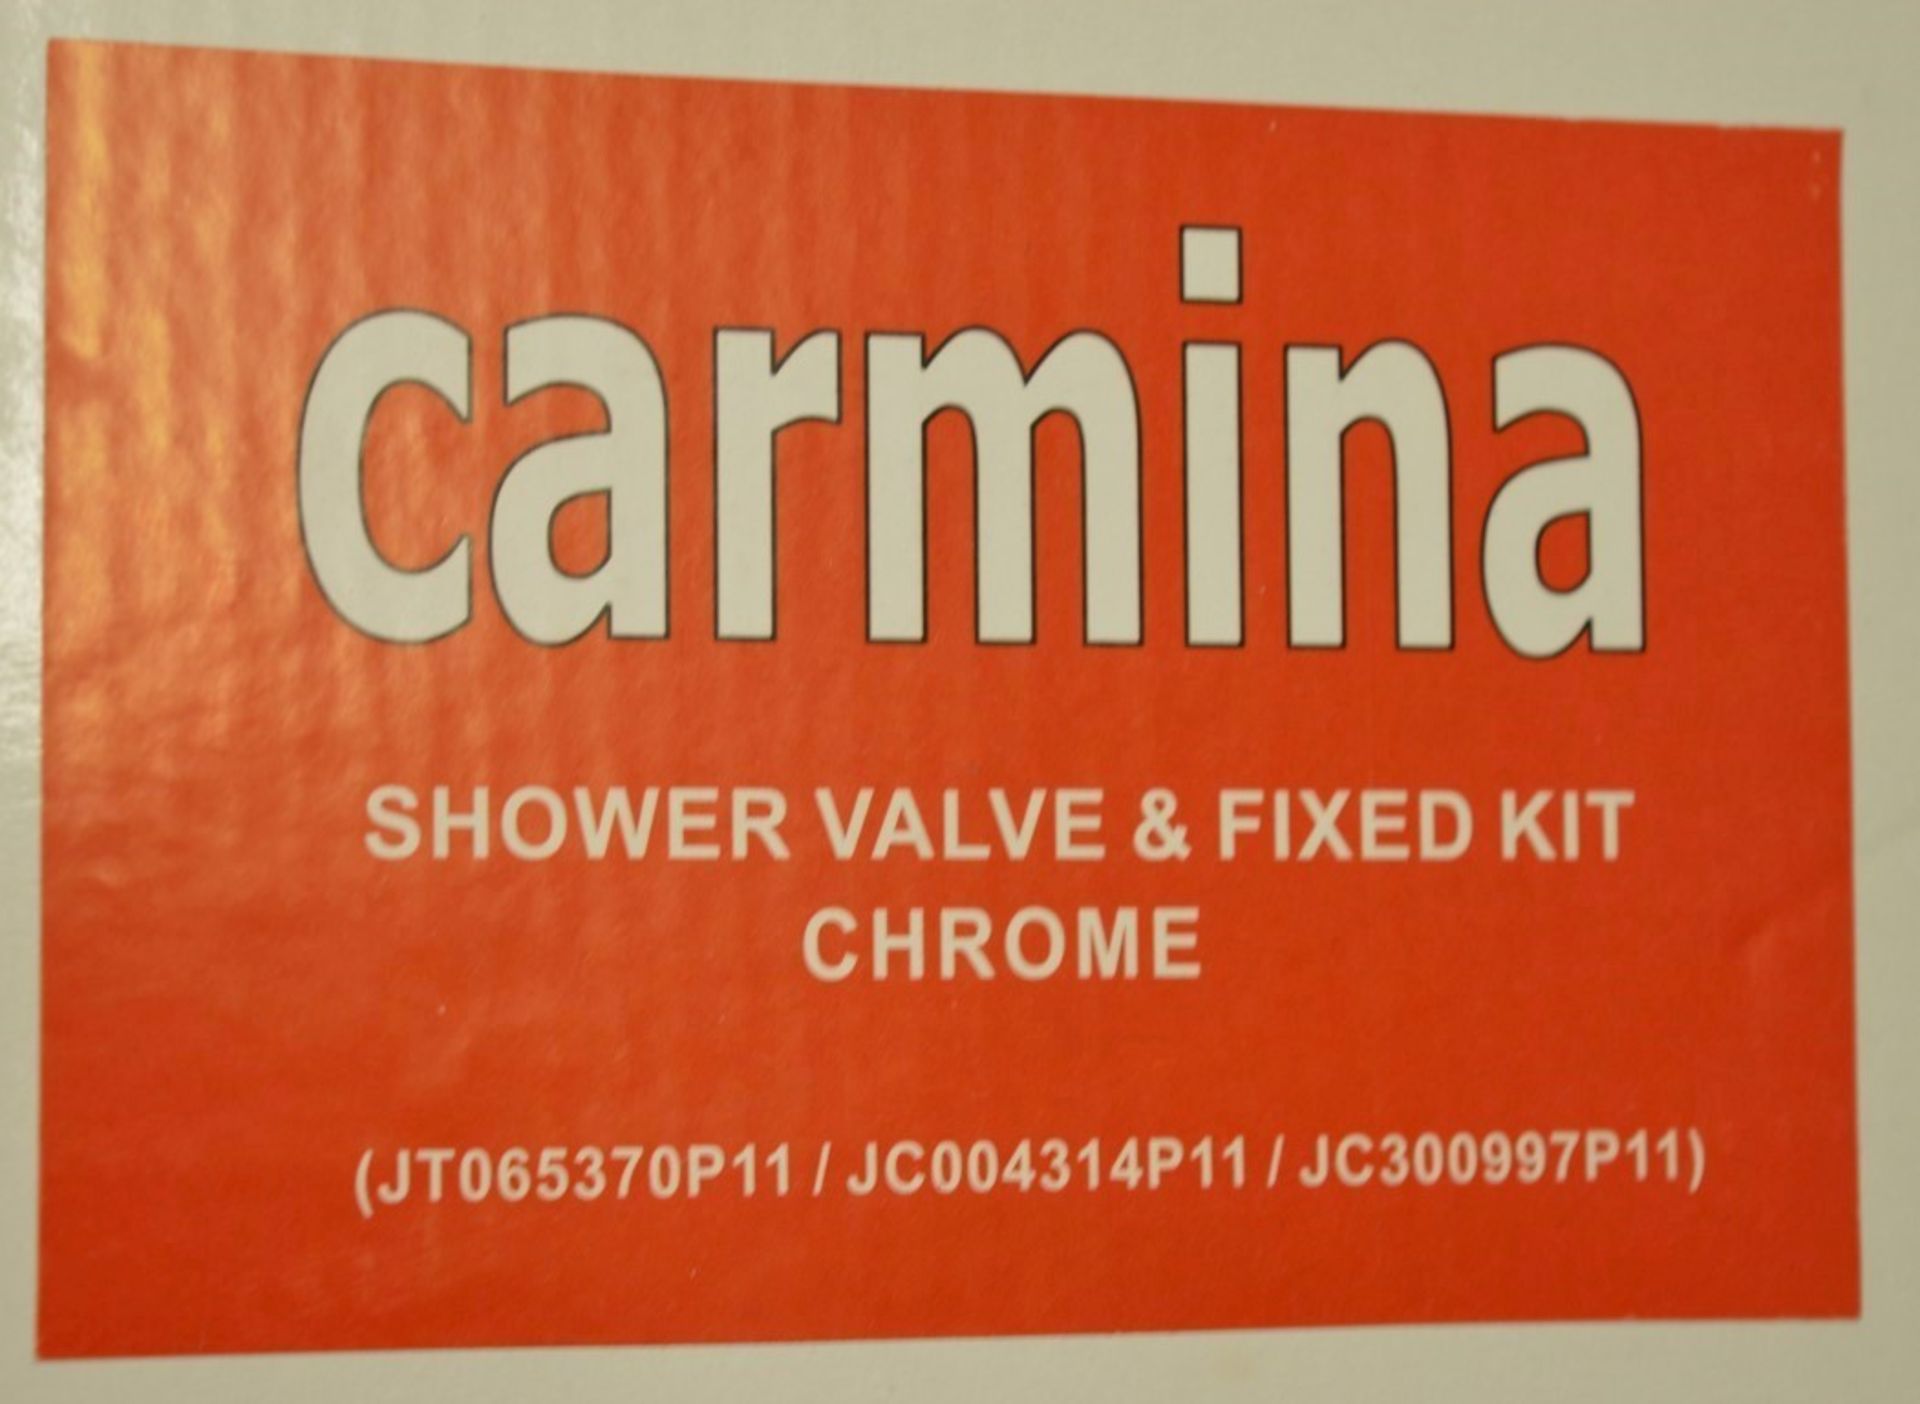 1 x Carmina Shower Valve Kit - Contains Chrome Shower Head, Fixed Arm and Manual Control - Brass - Image 6 of 16